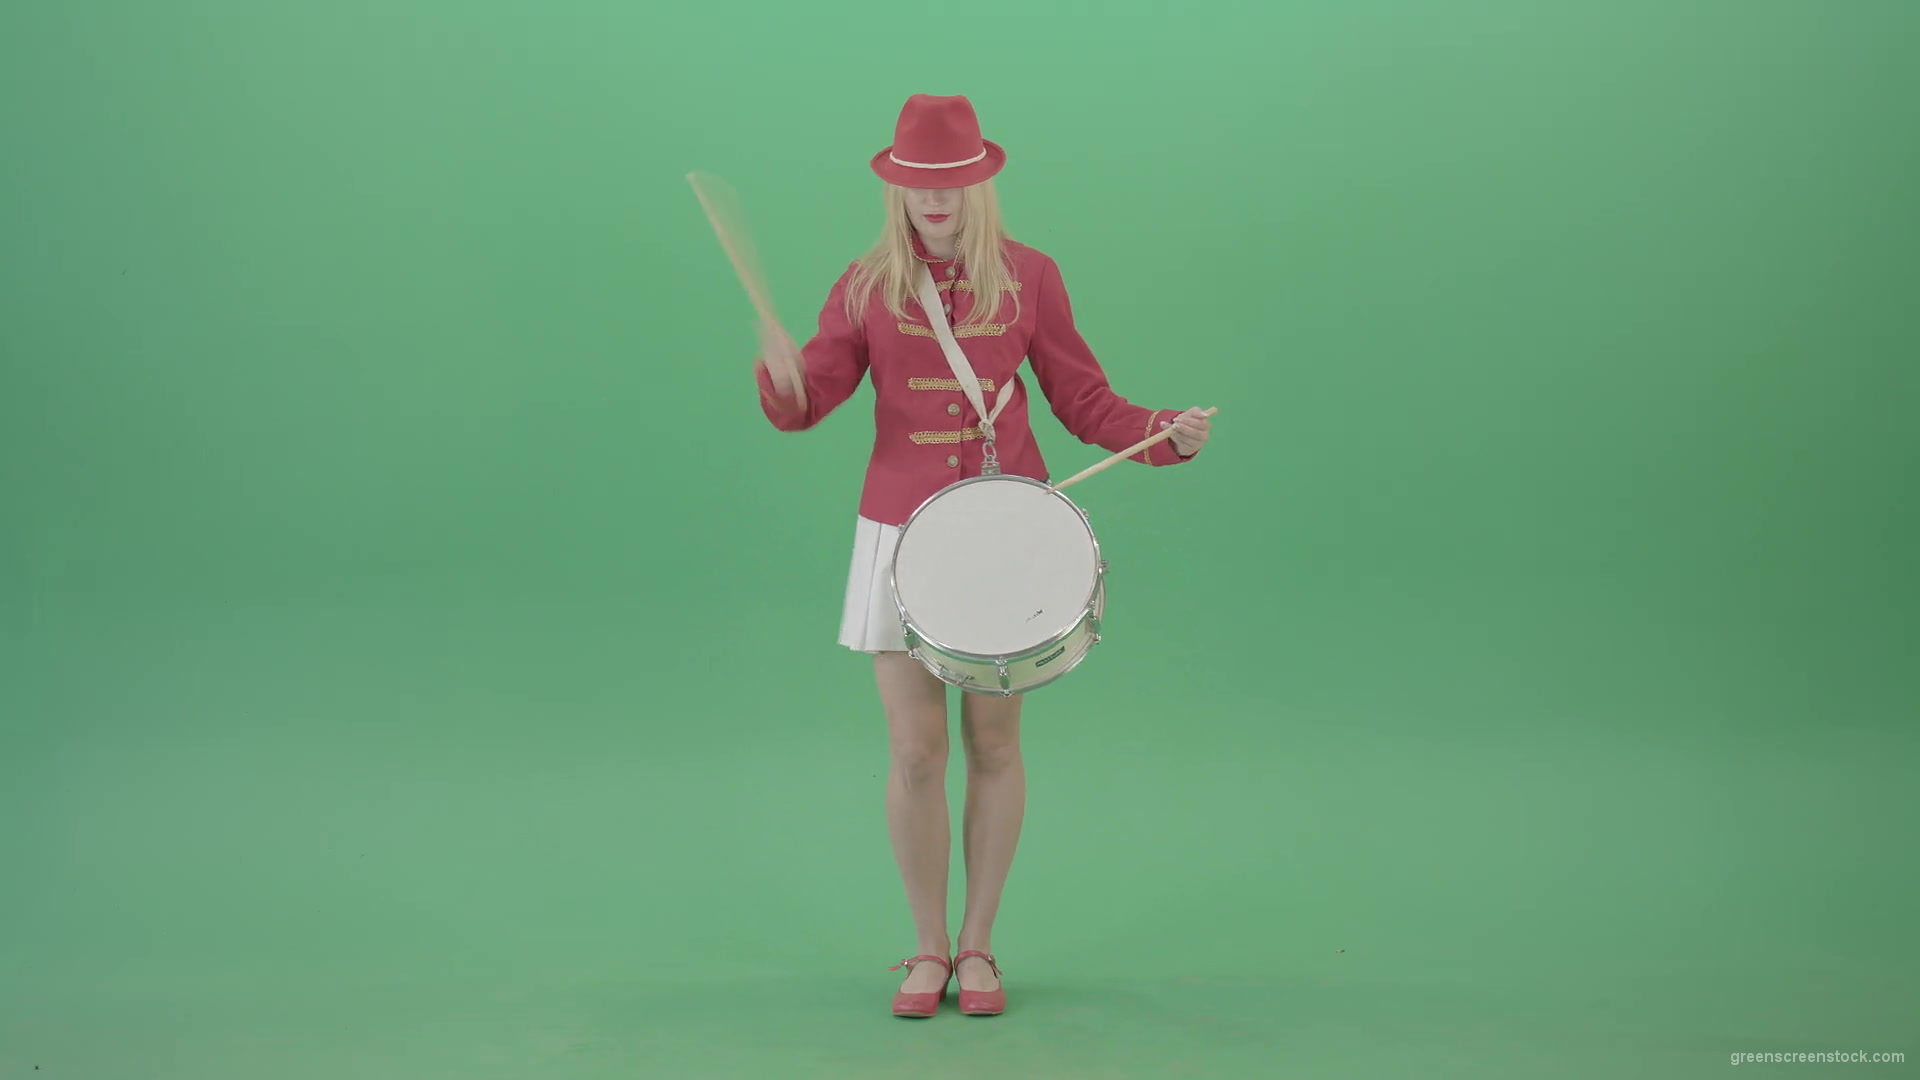 Girl-in-red-dress-marching-and-playing-drum-snare-music-instrument-over-green-screen-4K-Video-Footage-1920_002 Green Screen Stock